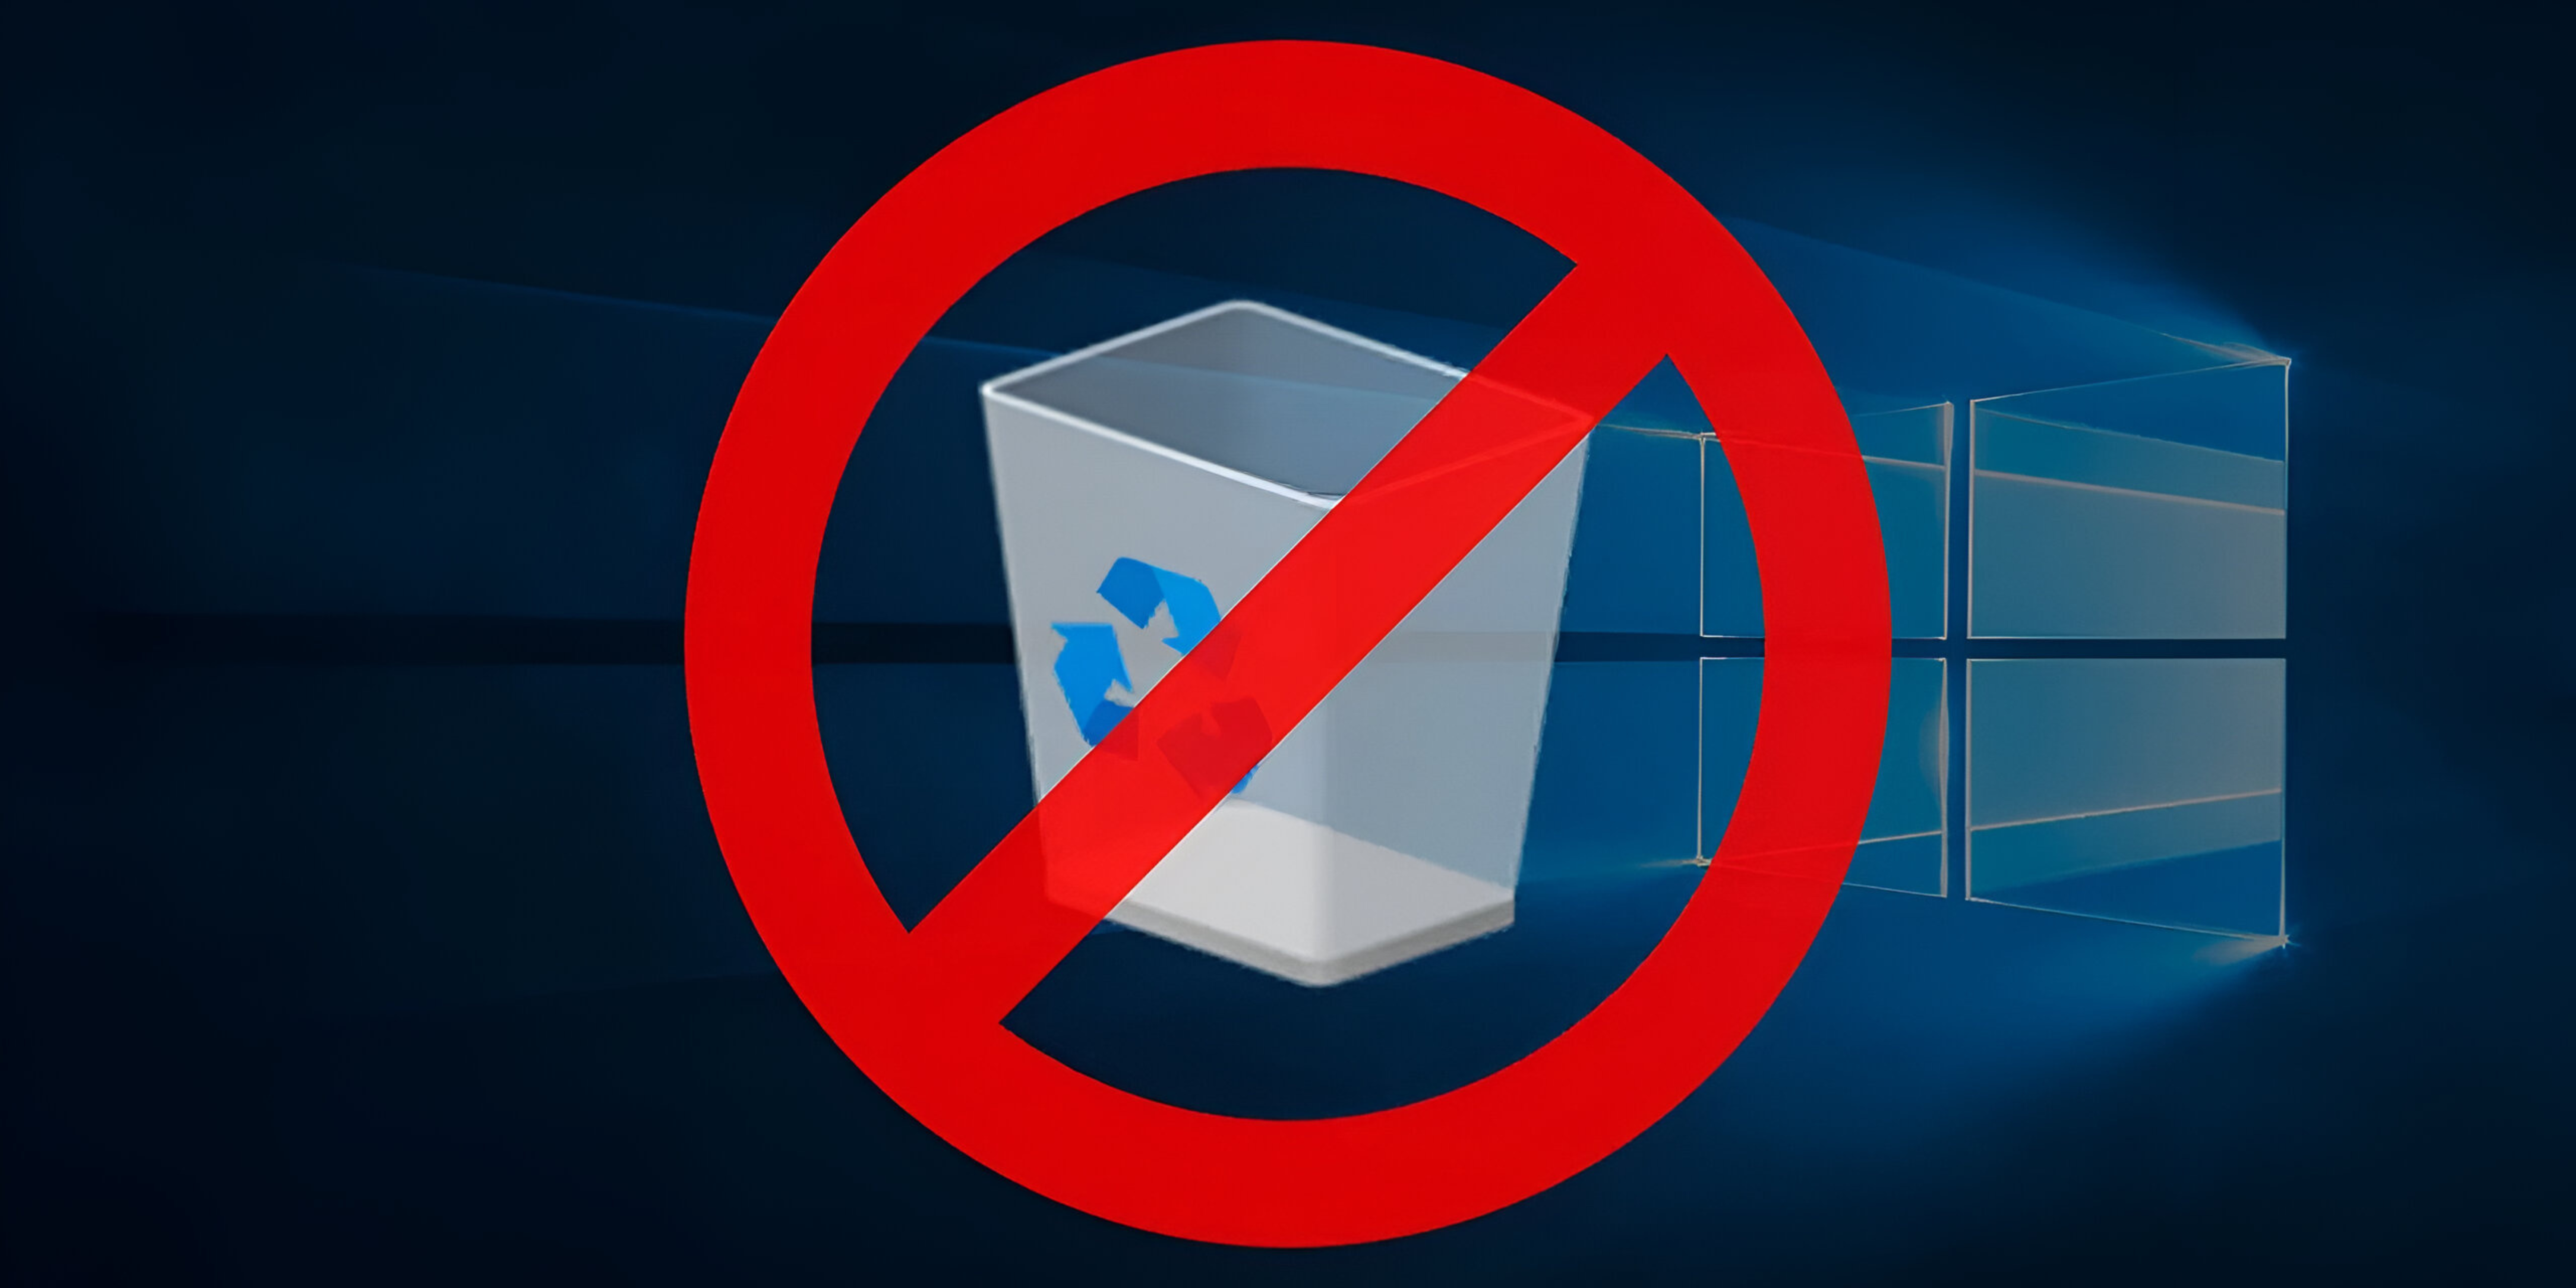 How to remove recycle bin from desktop